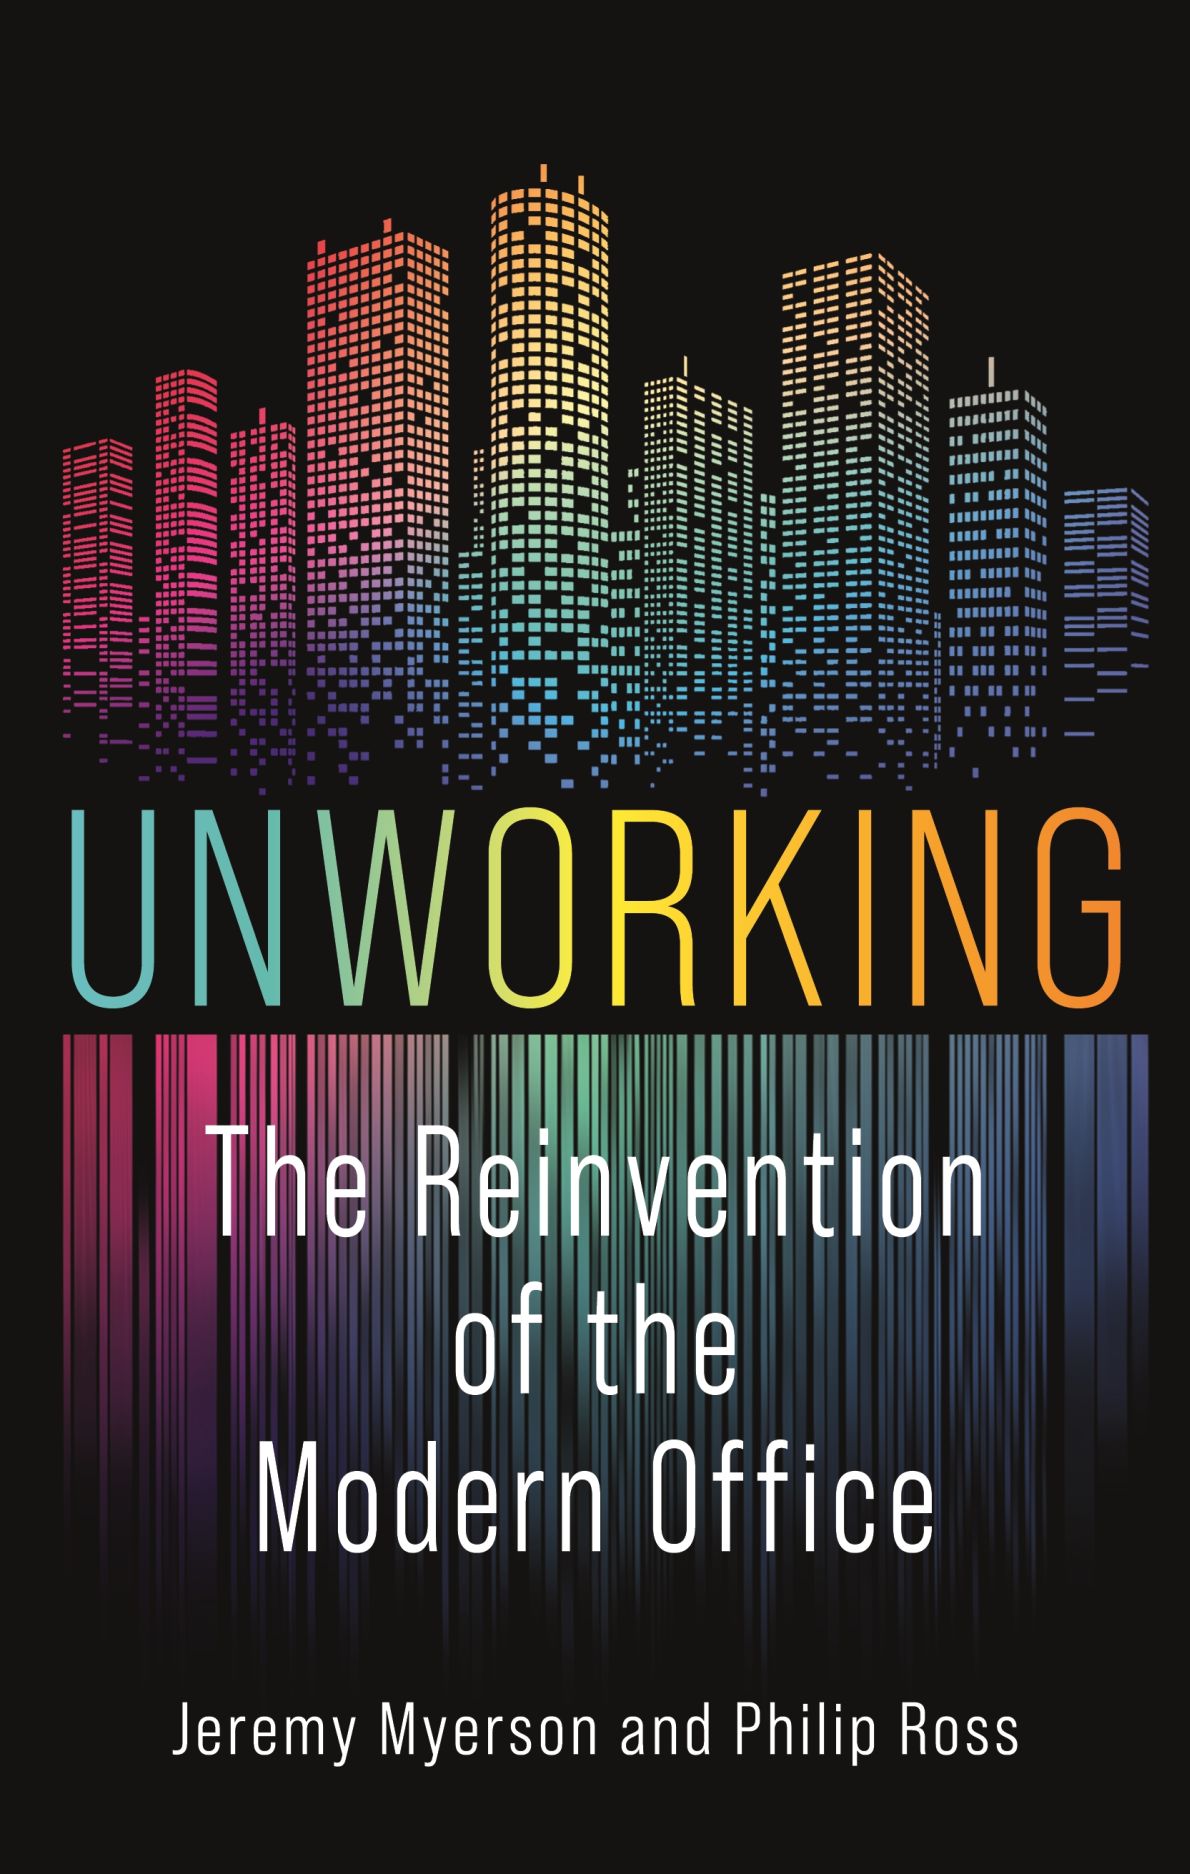 Unworking: The Reinvention of the Modern Office, Myerson, Ross